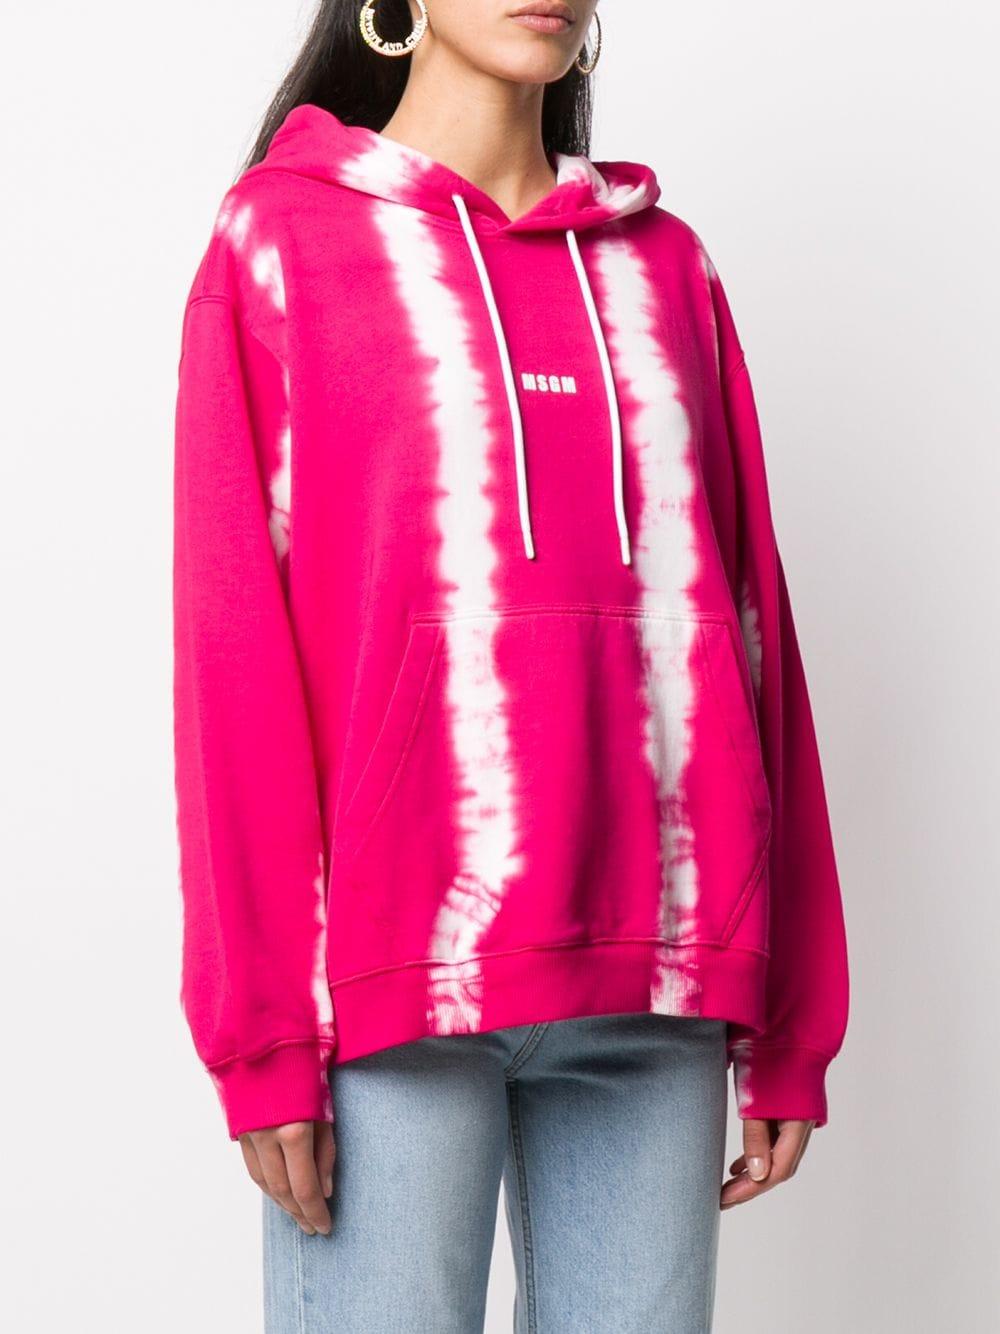 MSGM Tie-dye Cotton Hoodie in Pink - Save 40% - Lyst